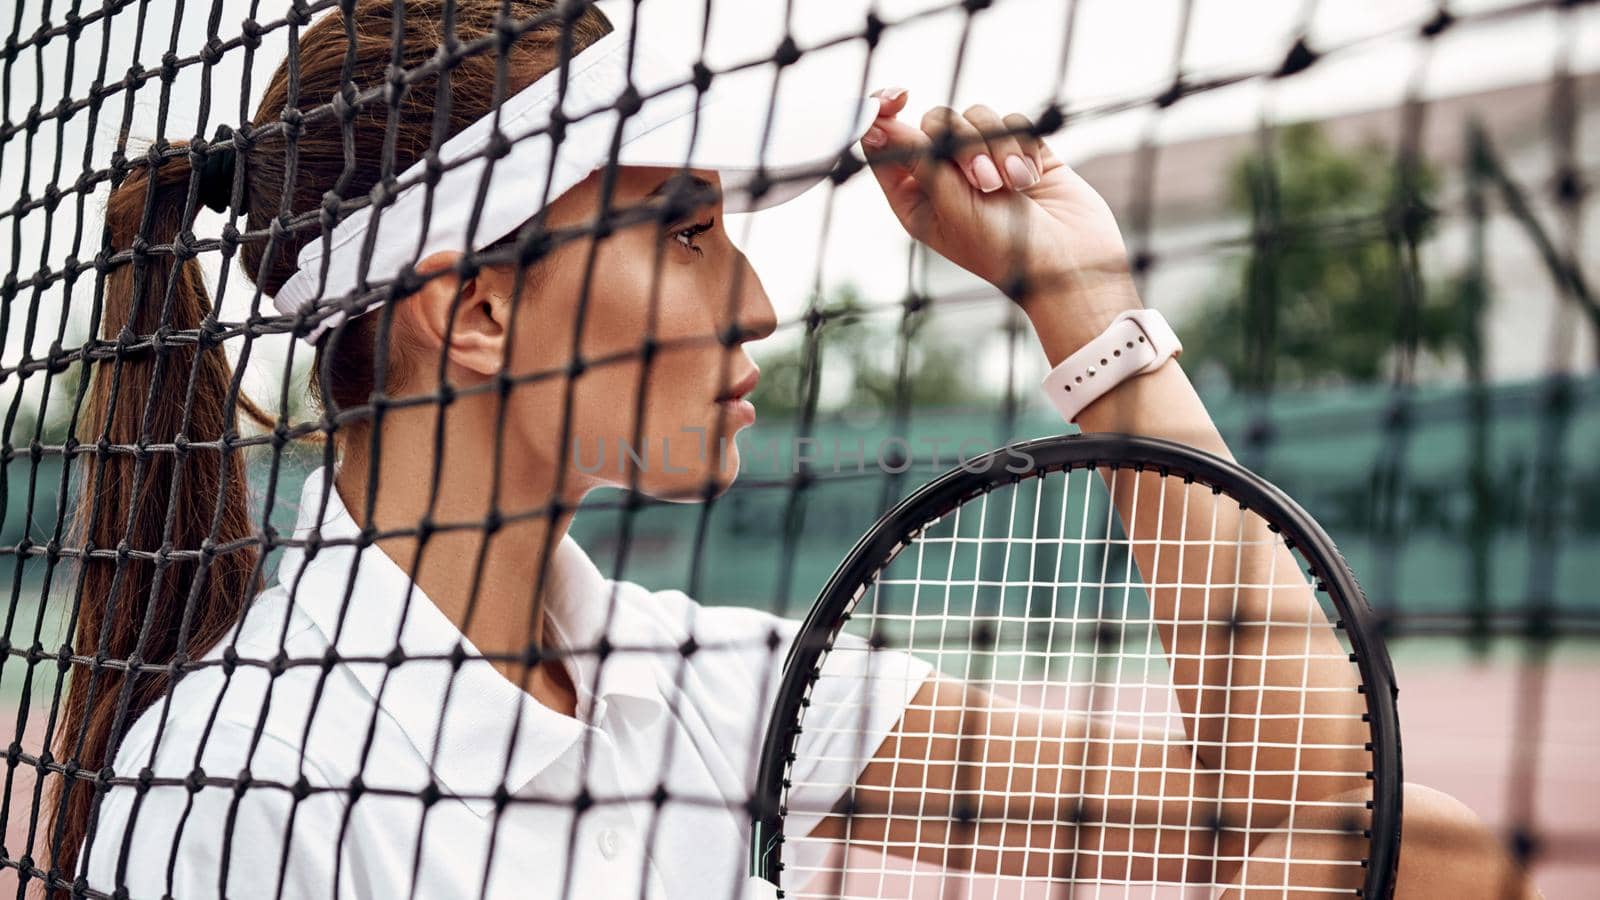 Beautiful sportswoman sitting with a racket on a court, looking away. Healthy lifestyle. A view through tennis net. Horizontal shot